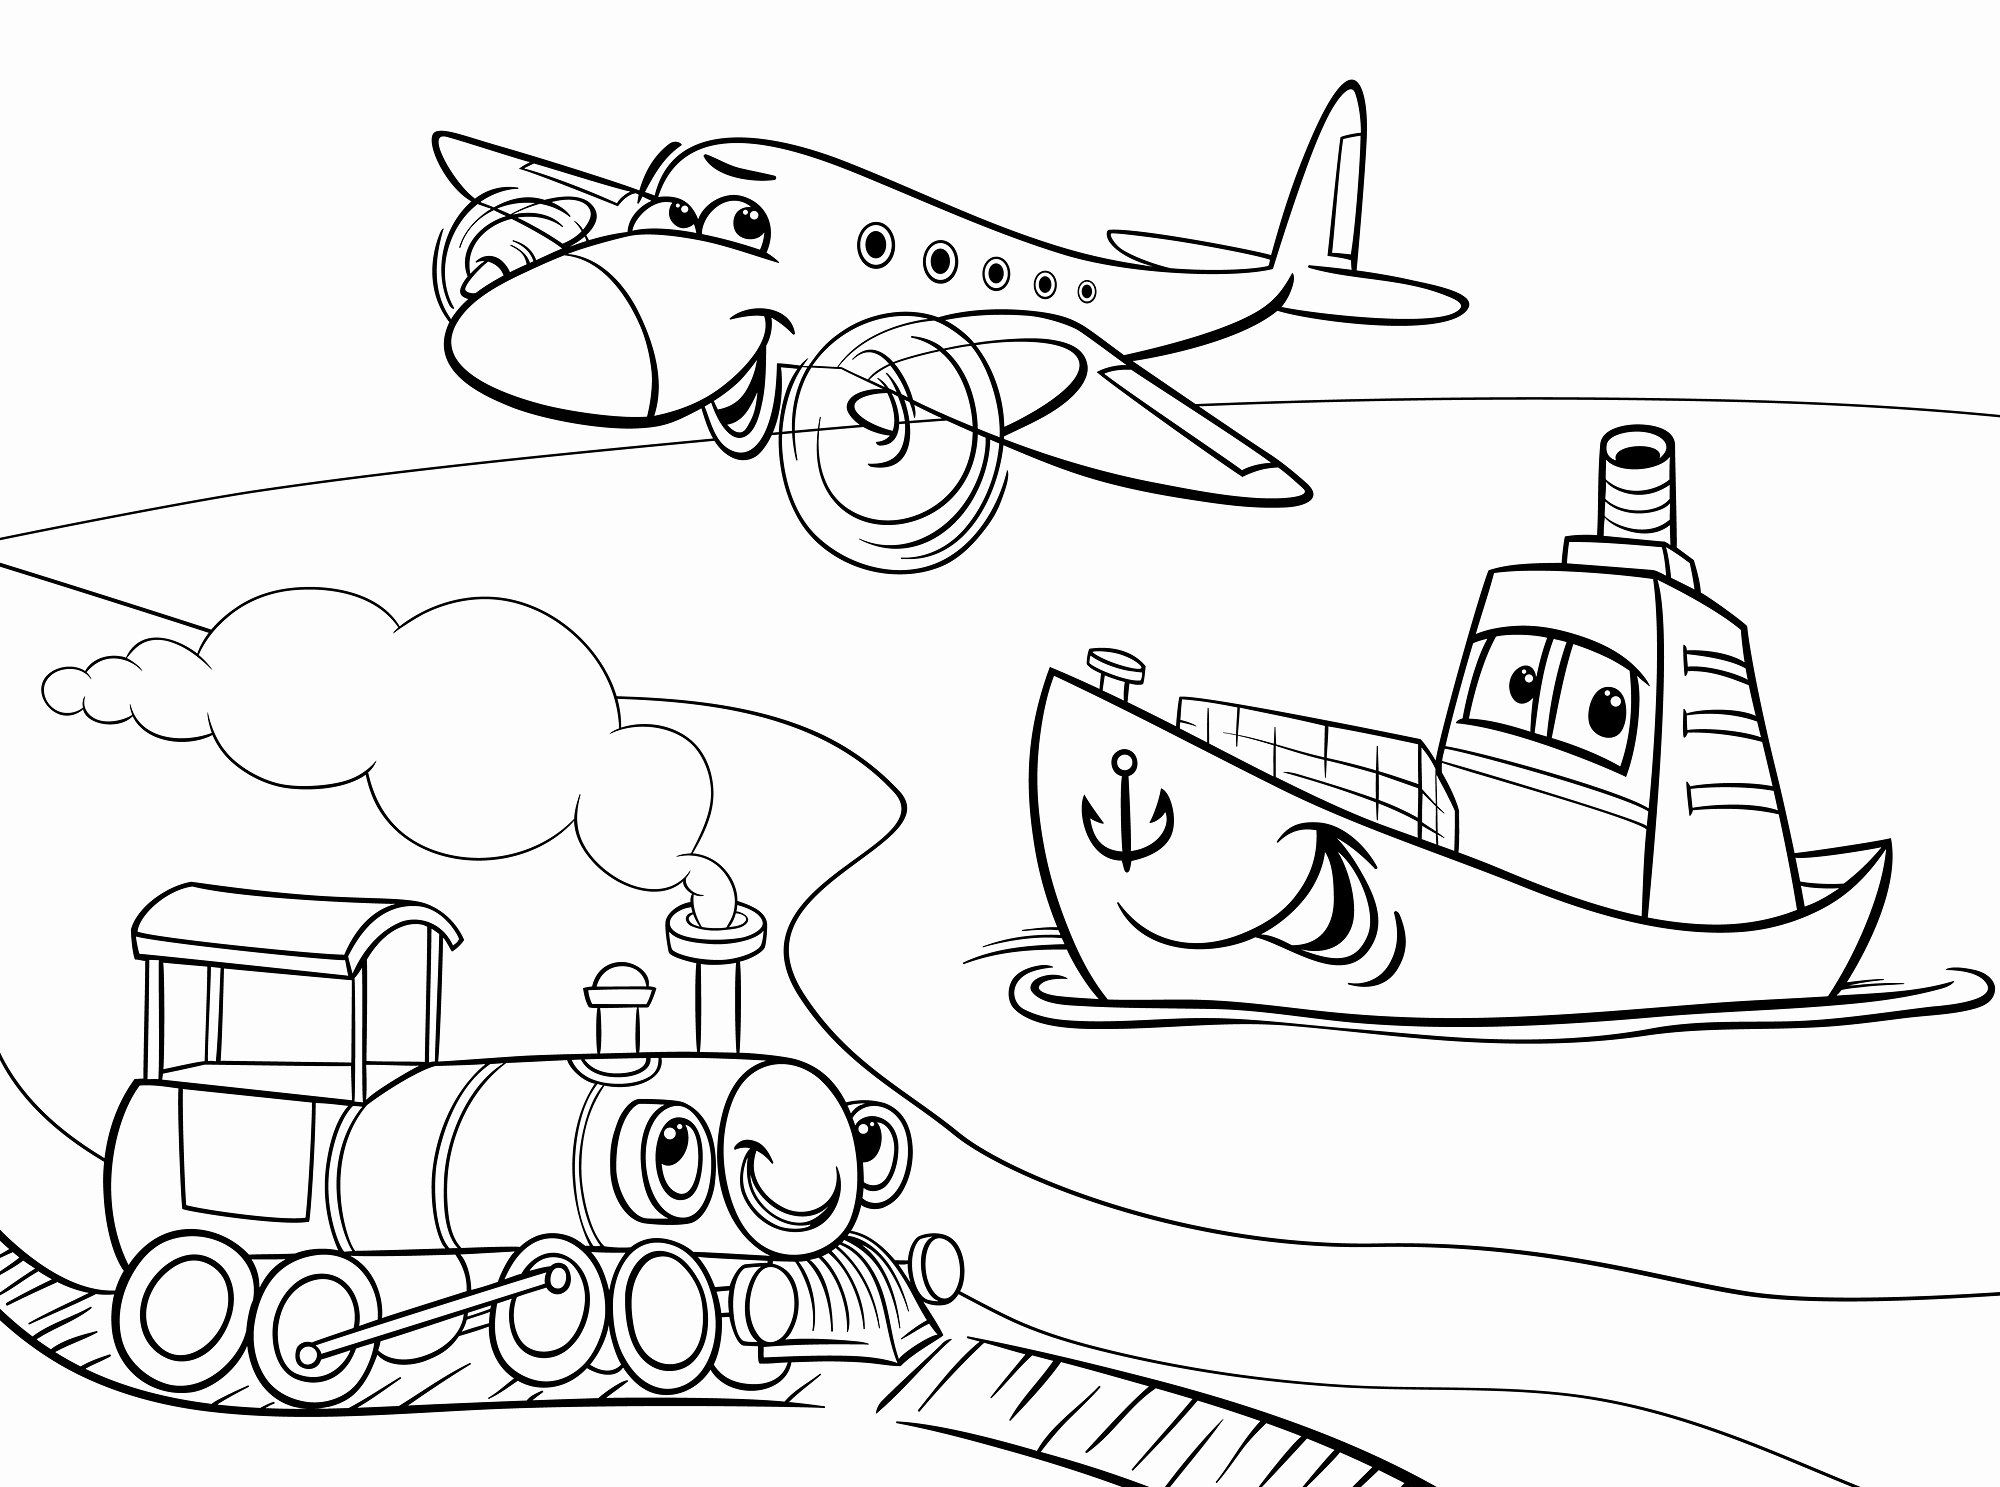 Land Transport Coloring Pages Luxury Road Trip Ideas for Kids Travel Snacks  & Games My Life in 2020 | Cartoon coloring pages, Coloring pages, Coloring  pages for boys